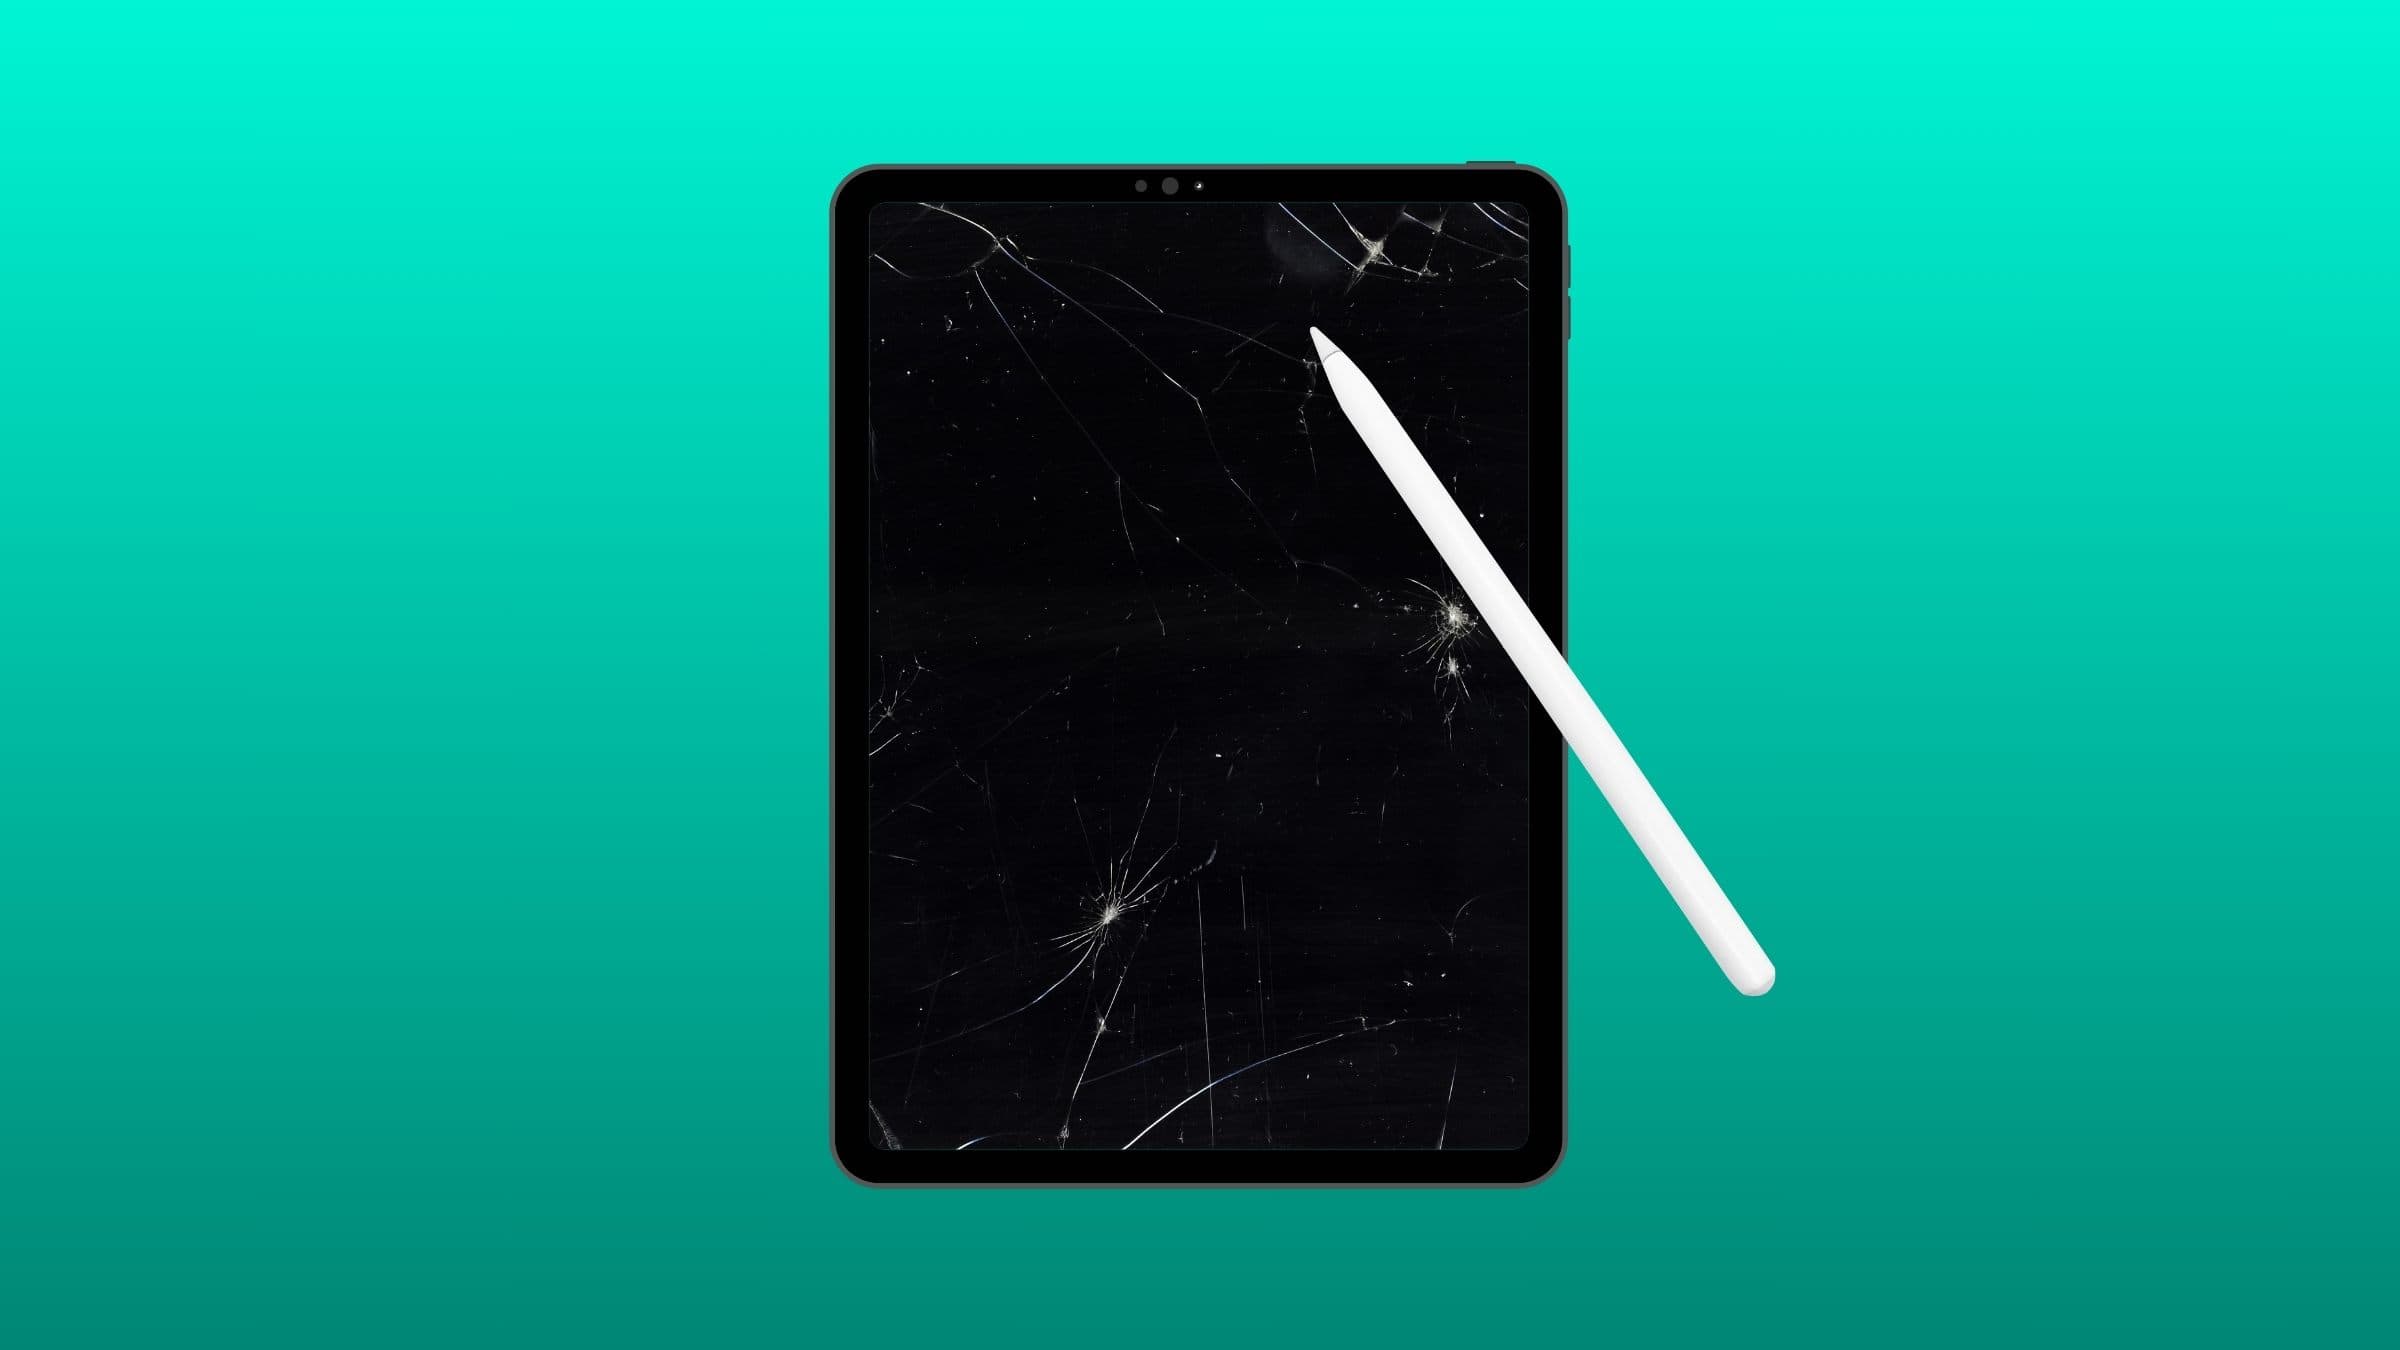 will apple pencil scratch ipads screen? answered